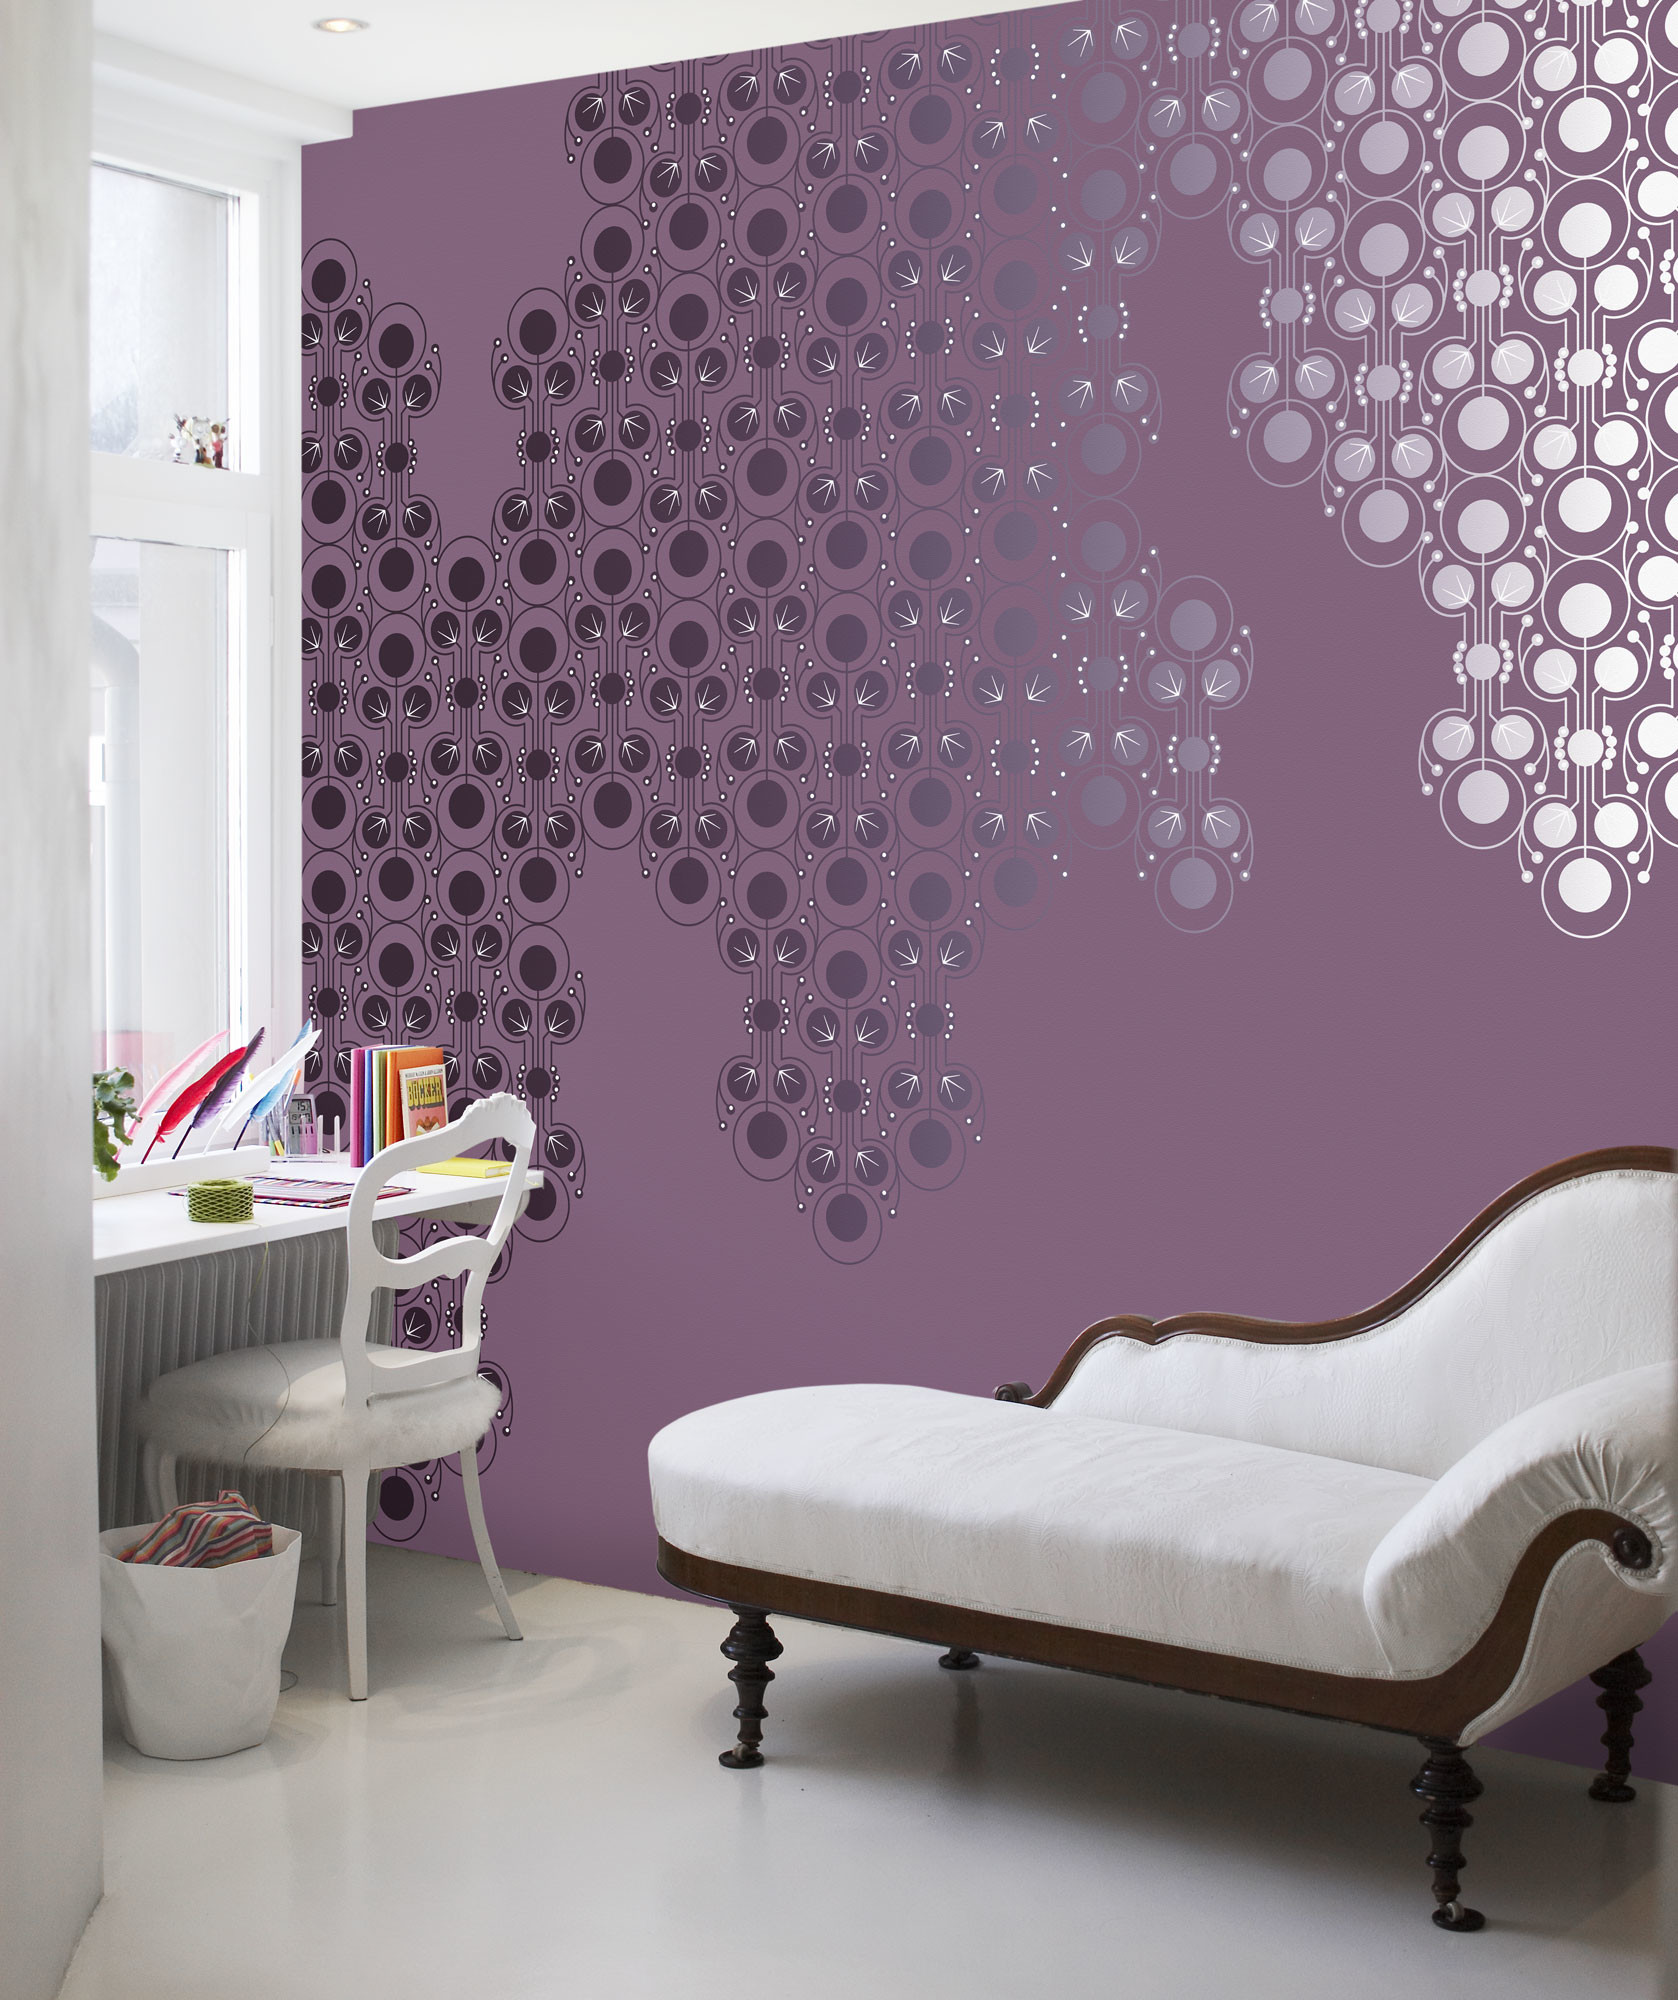 1678x2000 Images About On Pinterest Wallpapers Poetry And Metallic Interior Home  Colors Modern Purple Paint Bedroom For Living Room Pink Adorable Decora